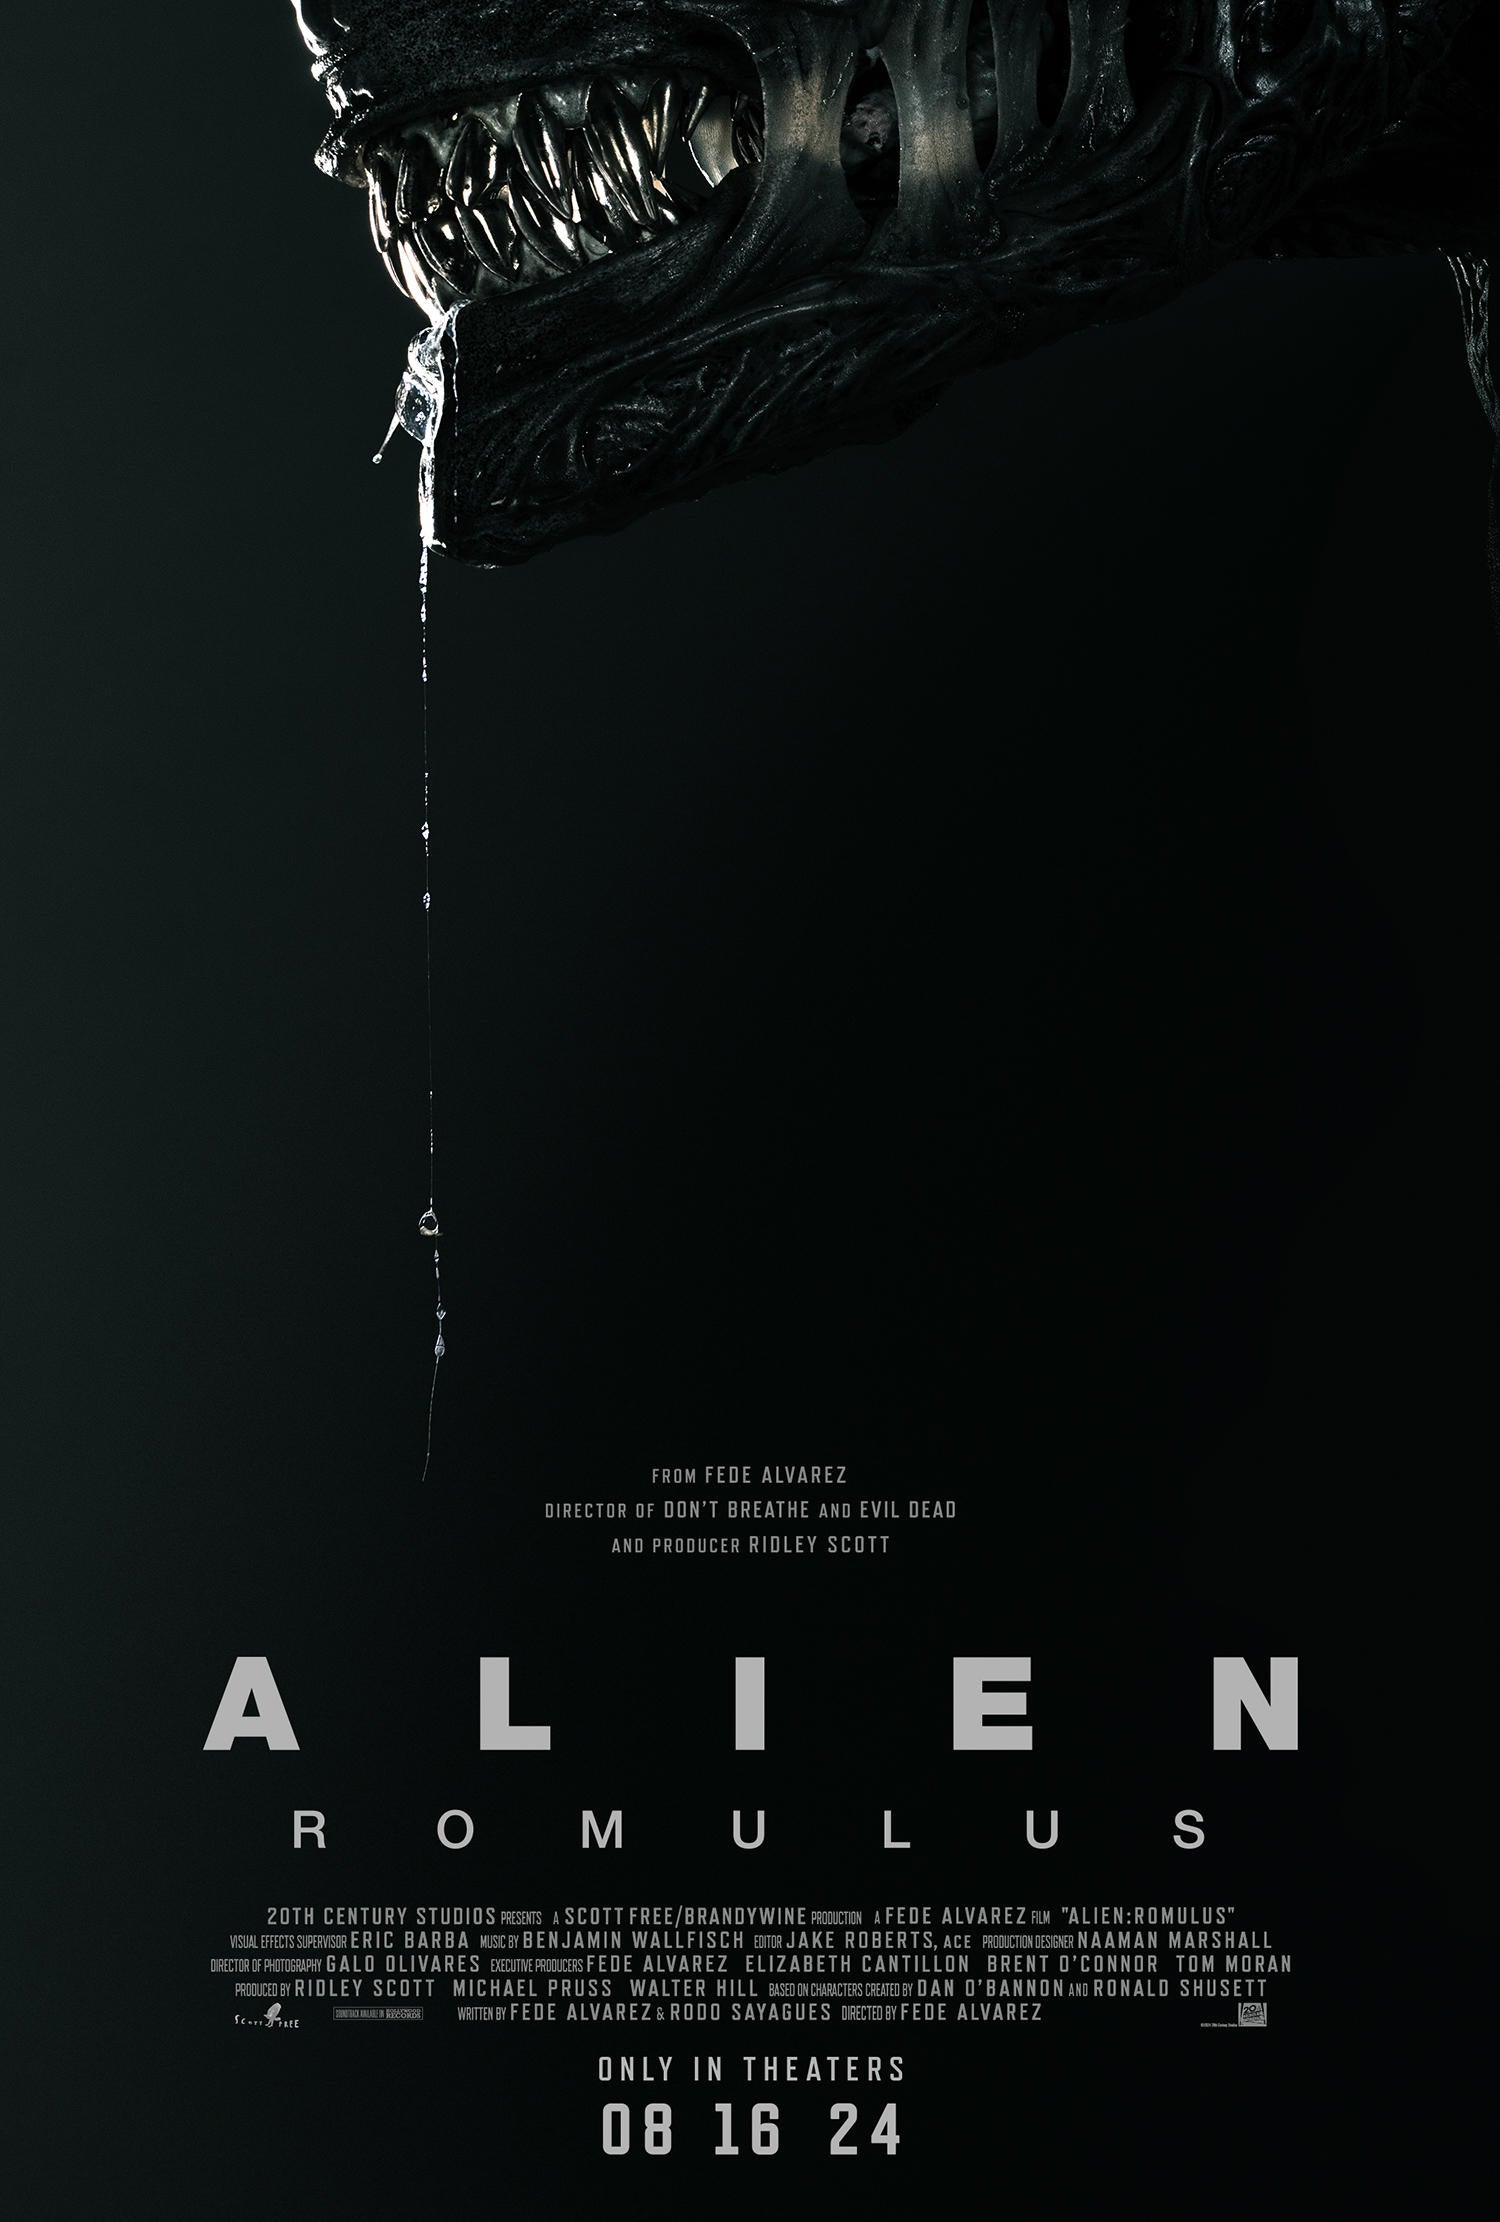 ALIEN: ROMULUS – © 2024 20th Century Studios. All Rights Reserved.